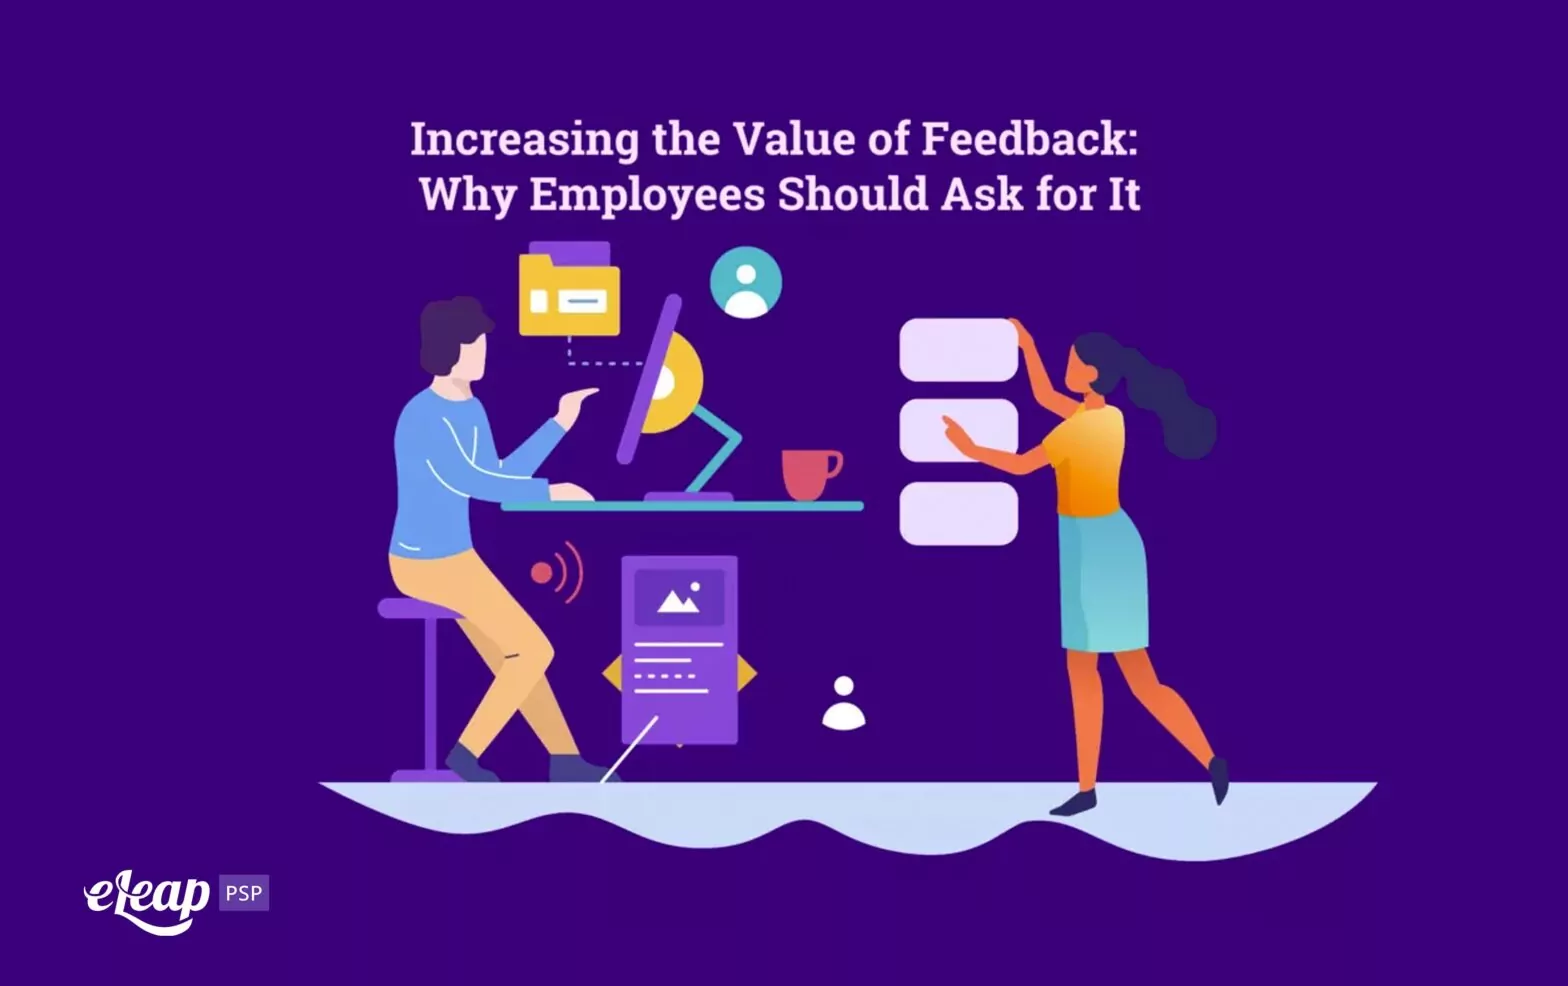 Increasing the Value of Feedback: Why Employees Should Ask for It